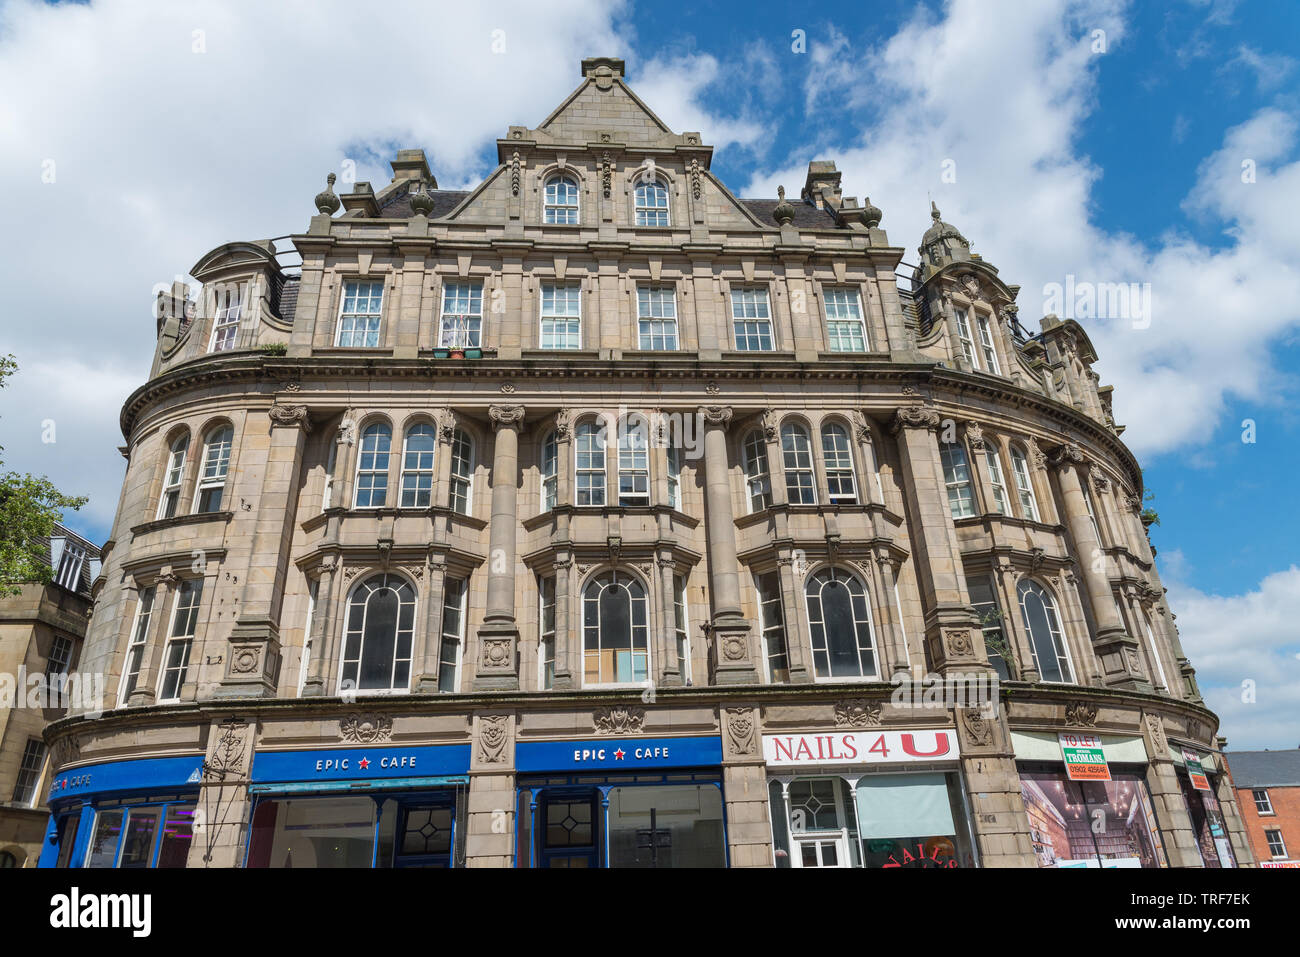 Large old stone building in Princes Square, Wolverhampton, UK Stock Photo